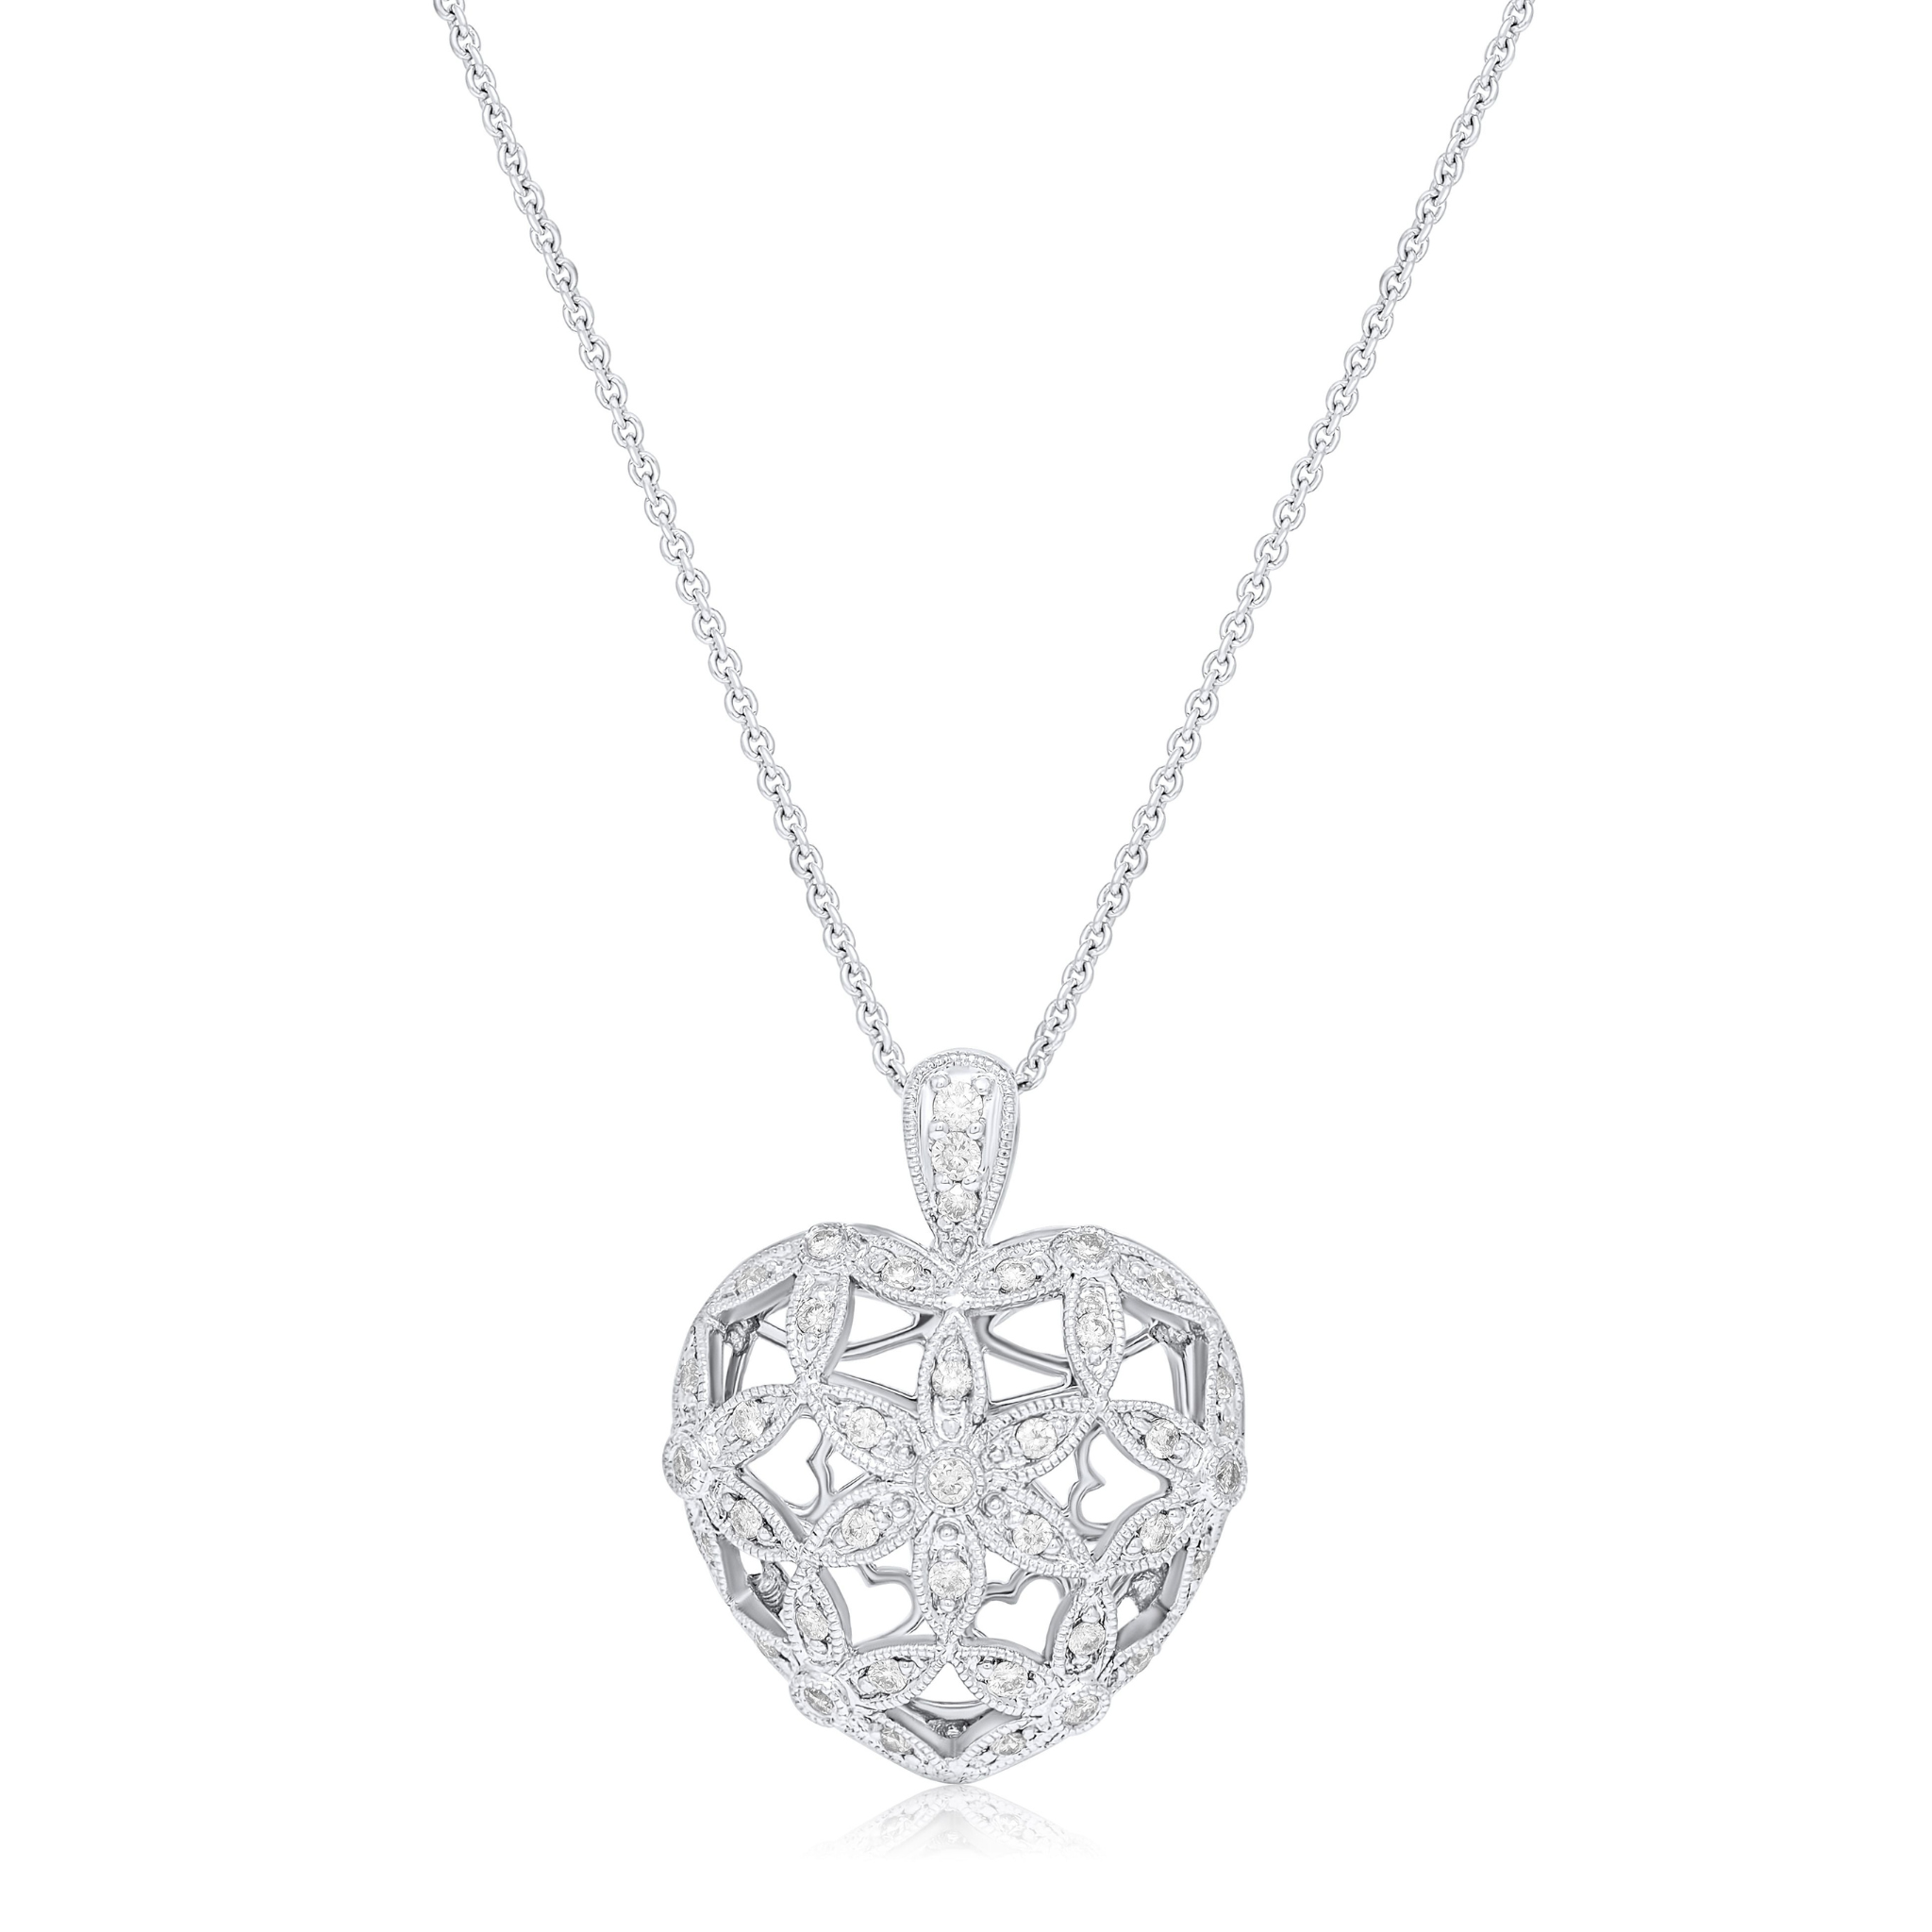 18kt White Gold Heart Shaped Diamond Pendant with 1.20 Cts.jpg